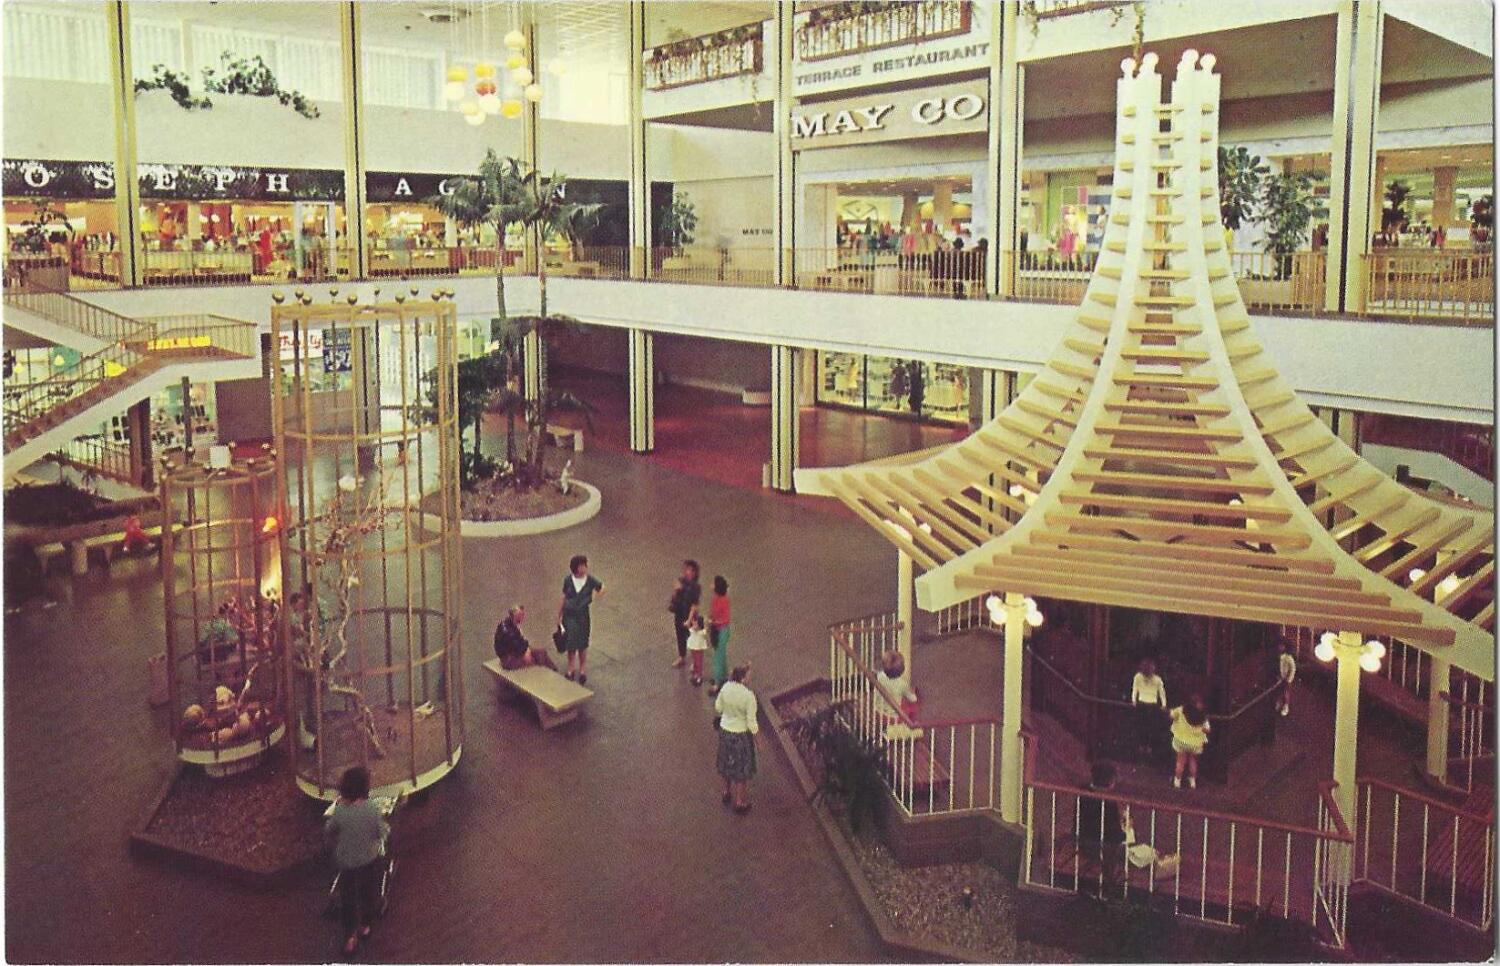 Patt Morrison: The death — or not? — of L.A.'s shopping malls